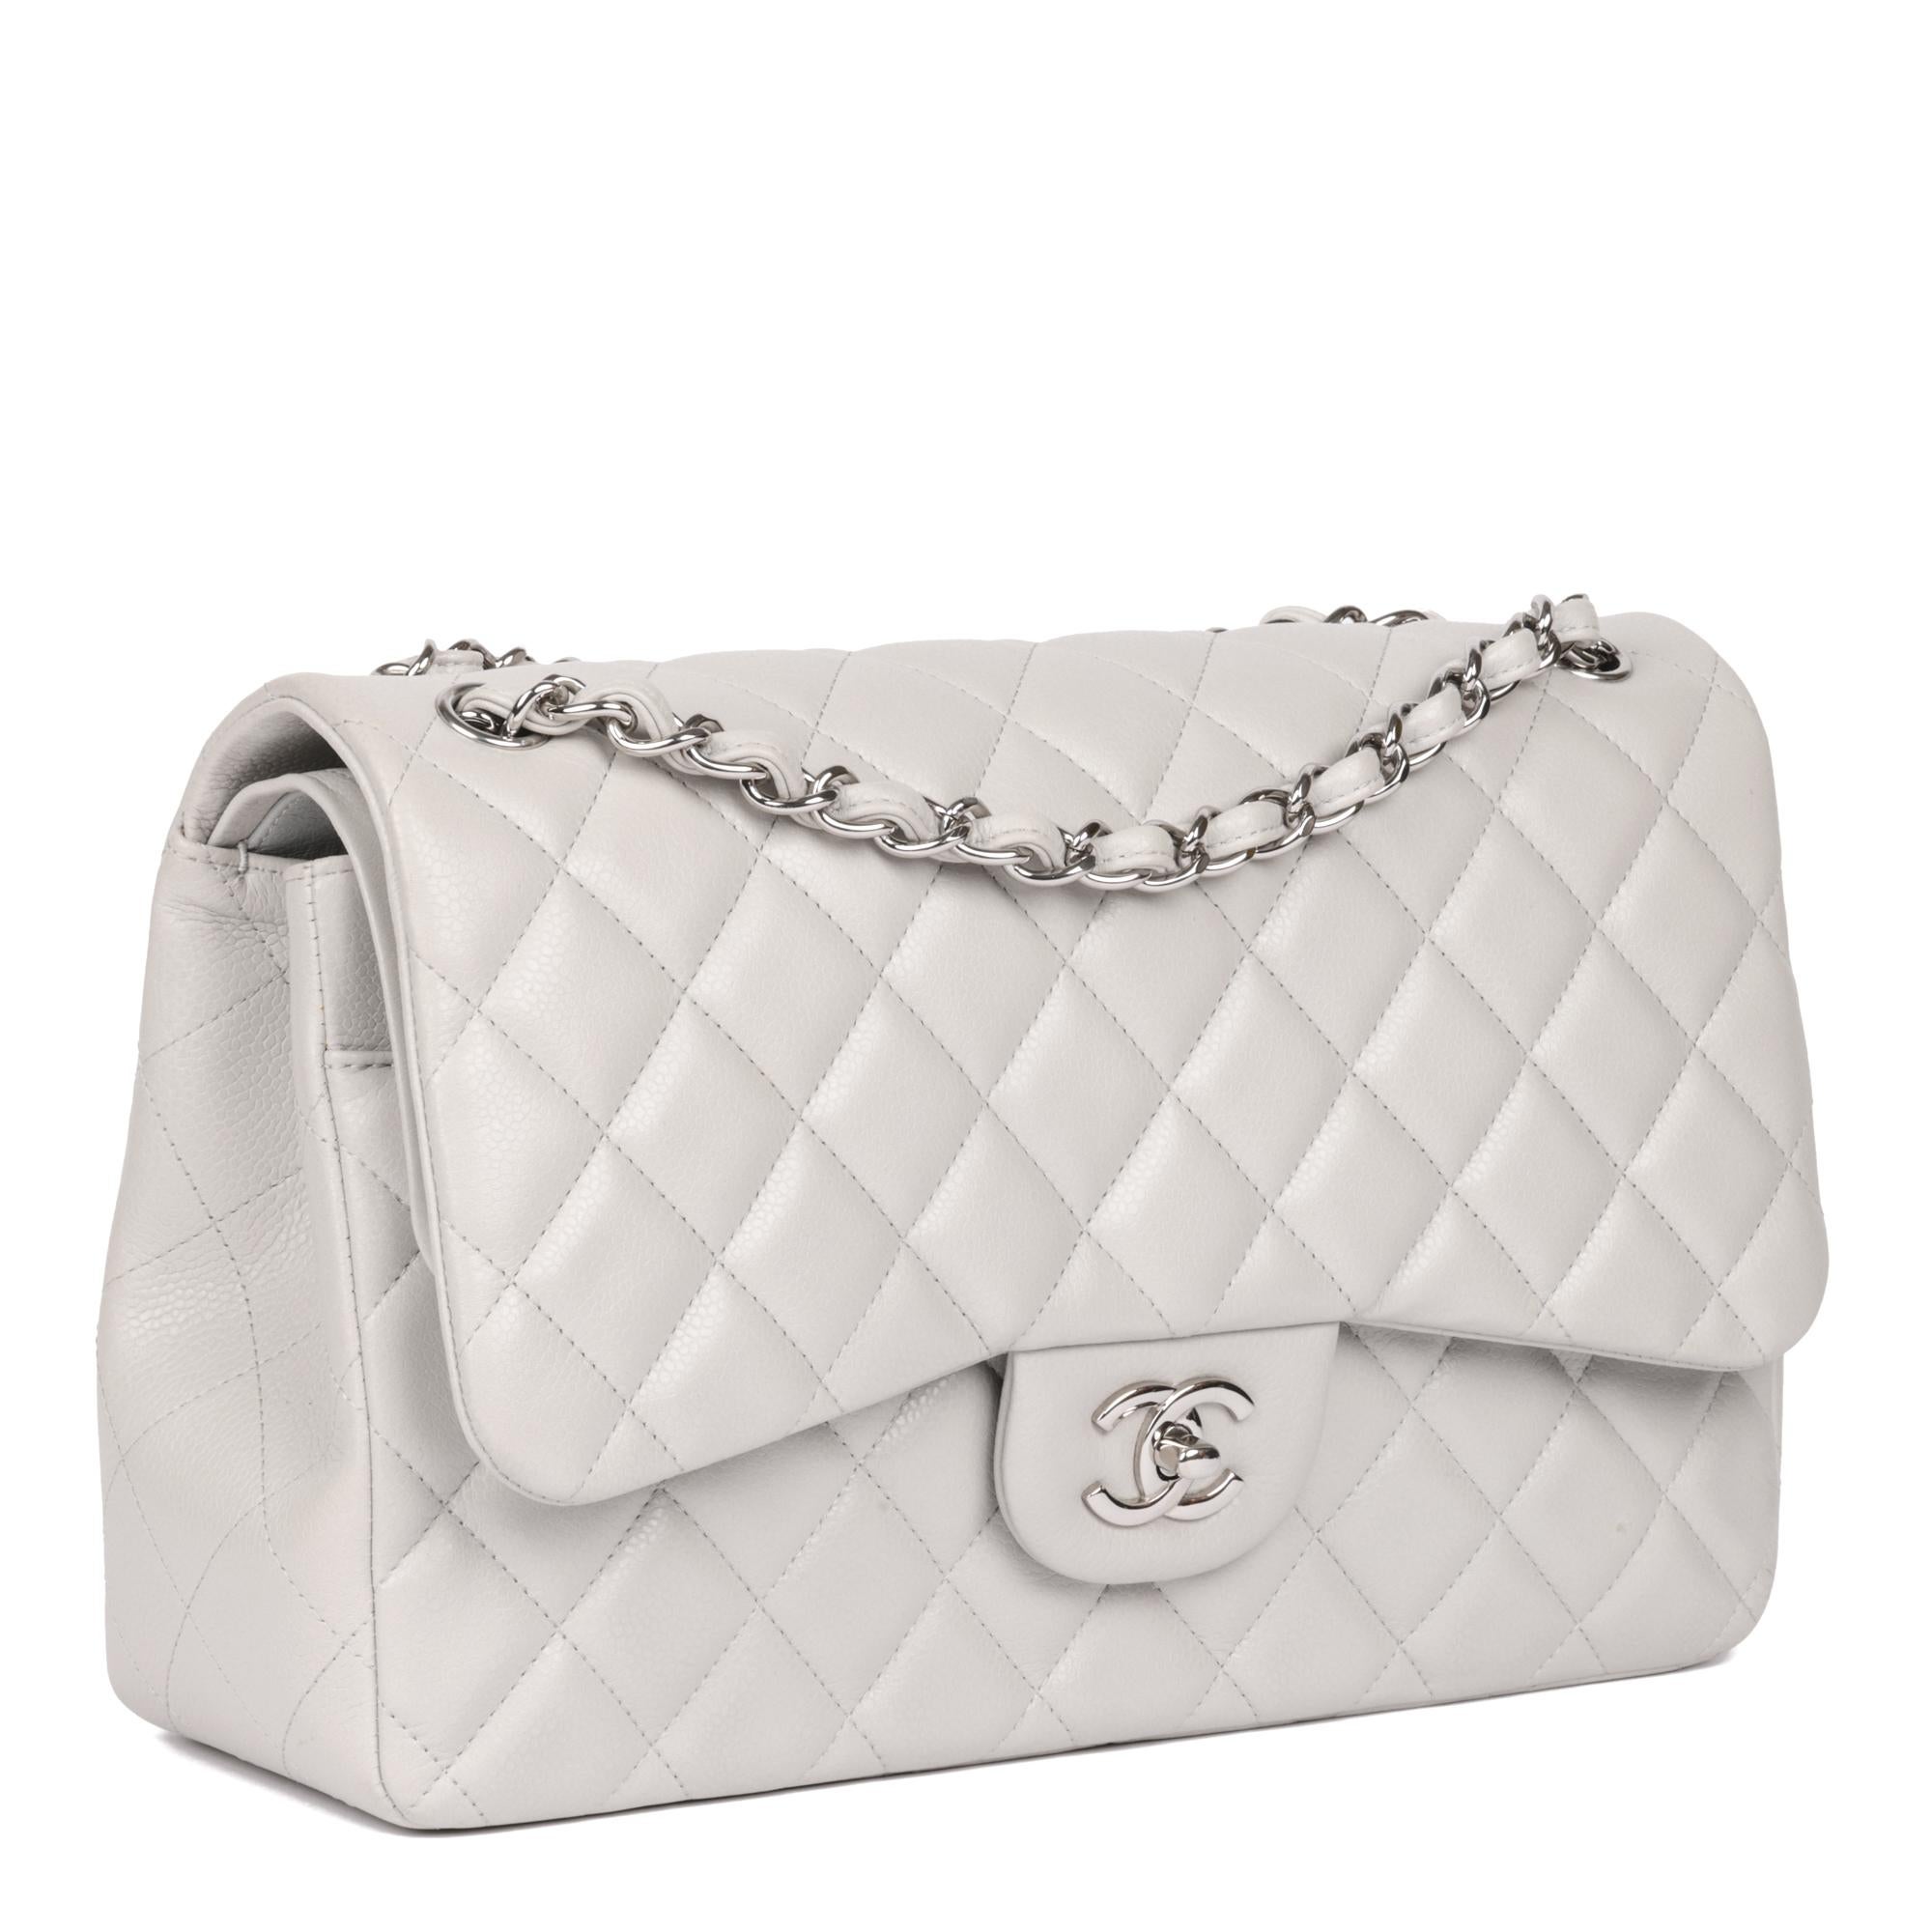 CHANEL
Grey Quilted Caviar Leather Jumbo Classic Double Flap Bag 

Xupes Reference: HB5044
Serial Number: 14895599
Age (Circa): 2011
Accompanied By: Chanel Dust Bag, Box, Care Booklet, Chanel Paper Bag, Ribbon, Protective Felt
Authenticity Details: